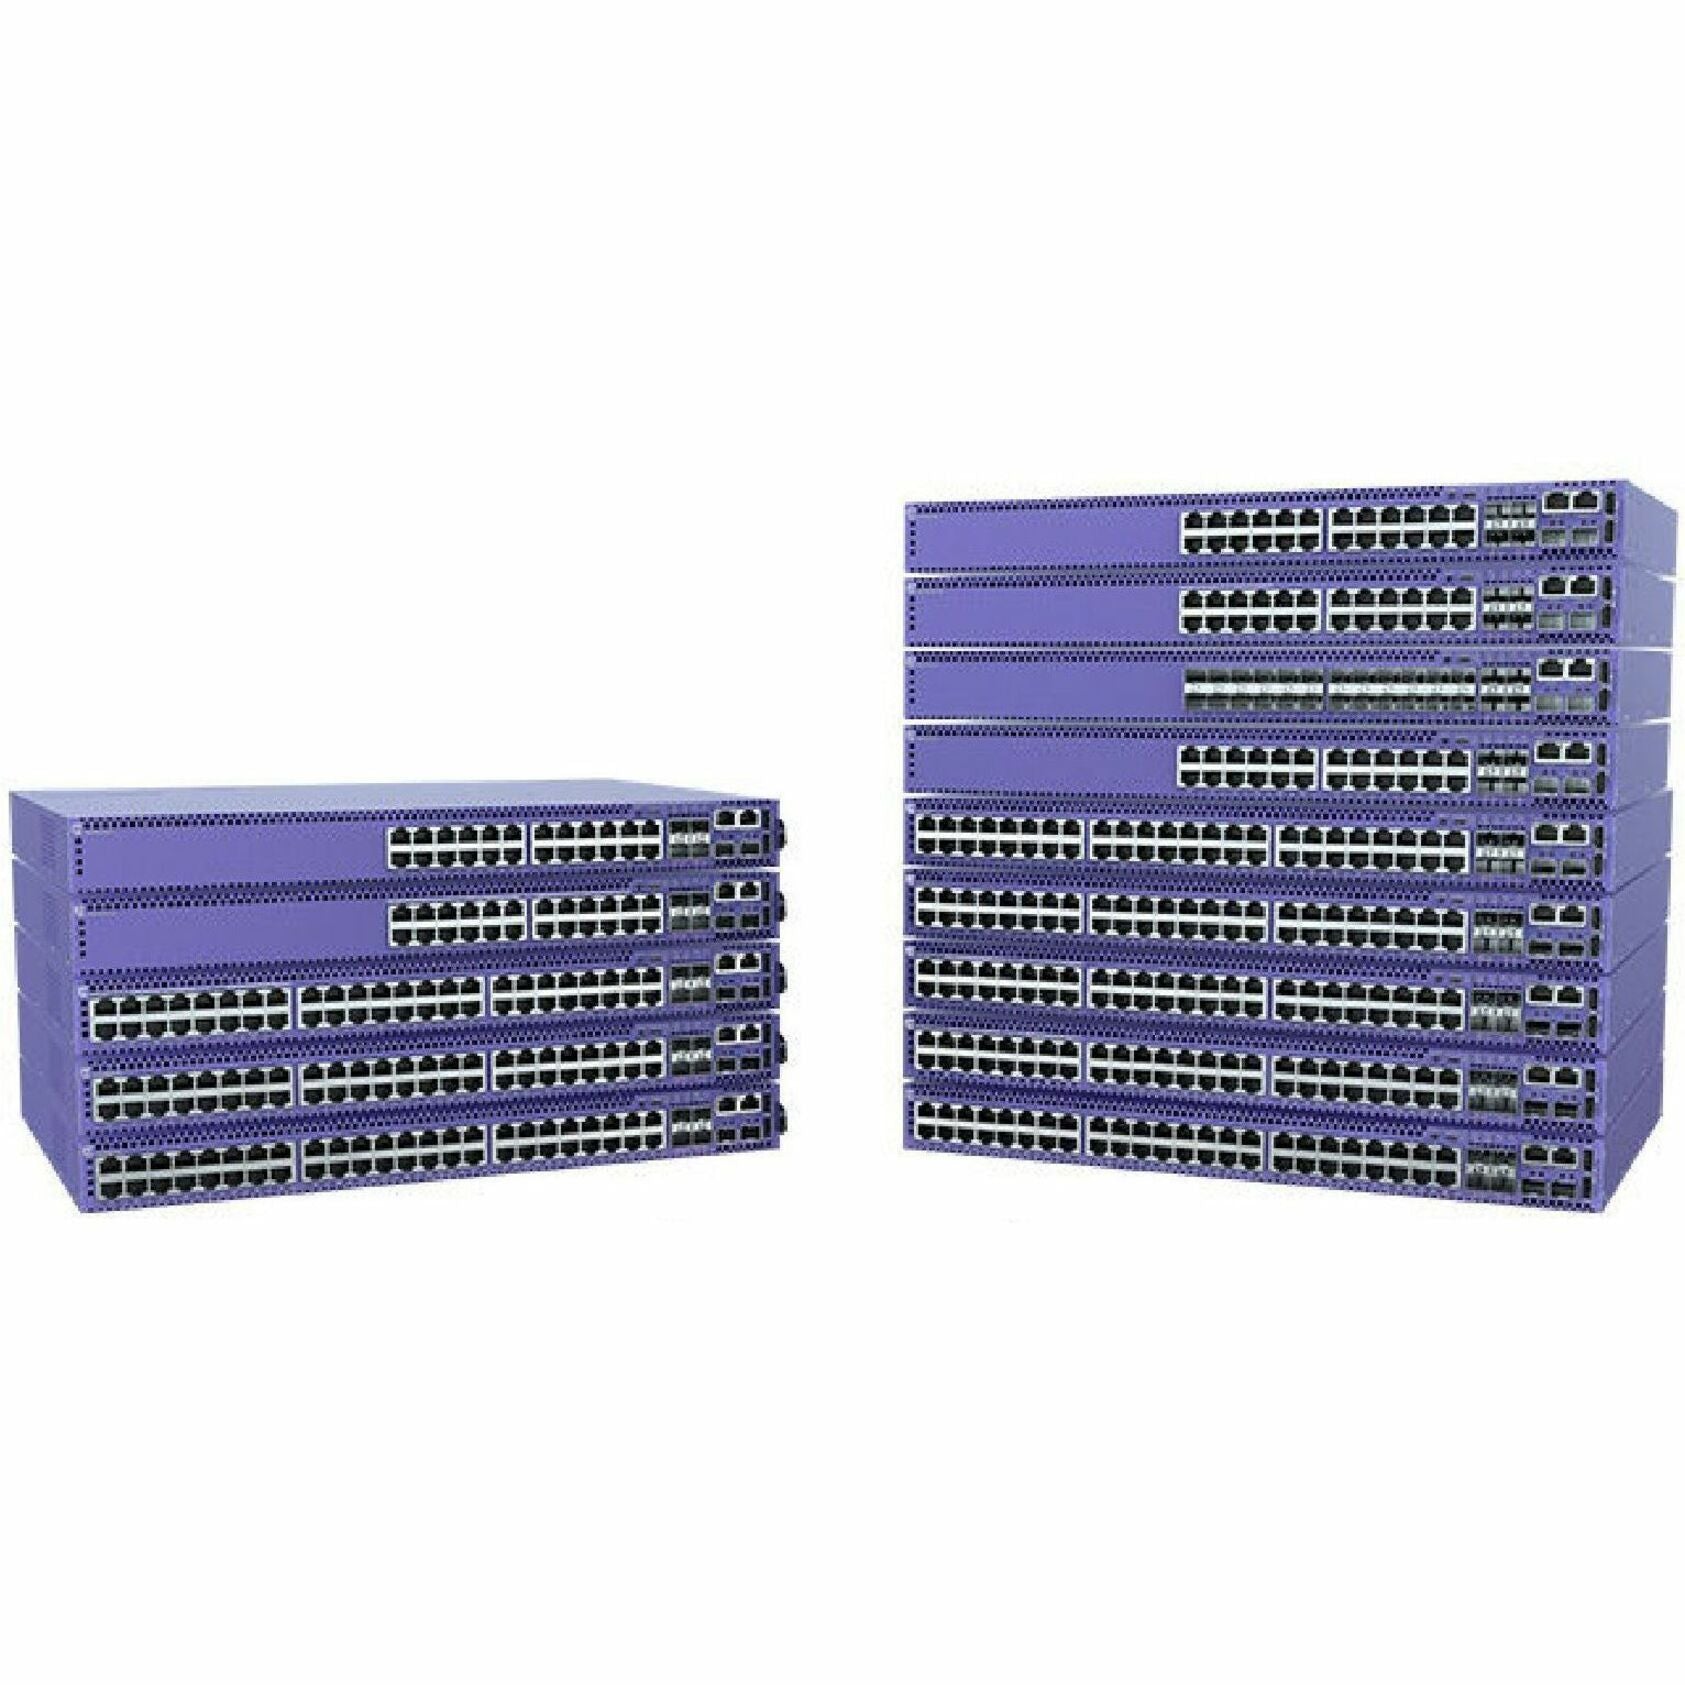 Extreme Networks 5420F-48P-4XL ExtremeSwitching 5420F Ethernet Switch, 48 Port Gigabit Ethernet PoE+ with LRM